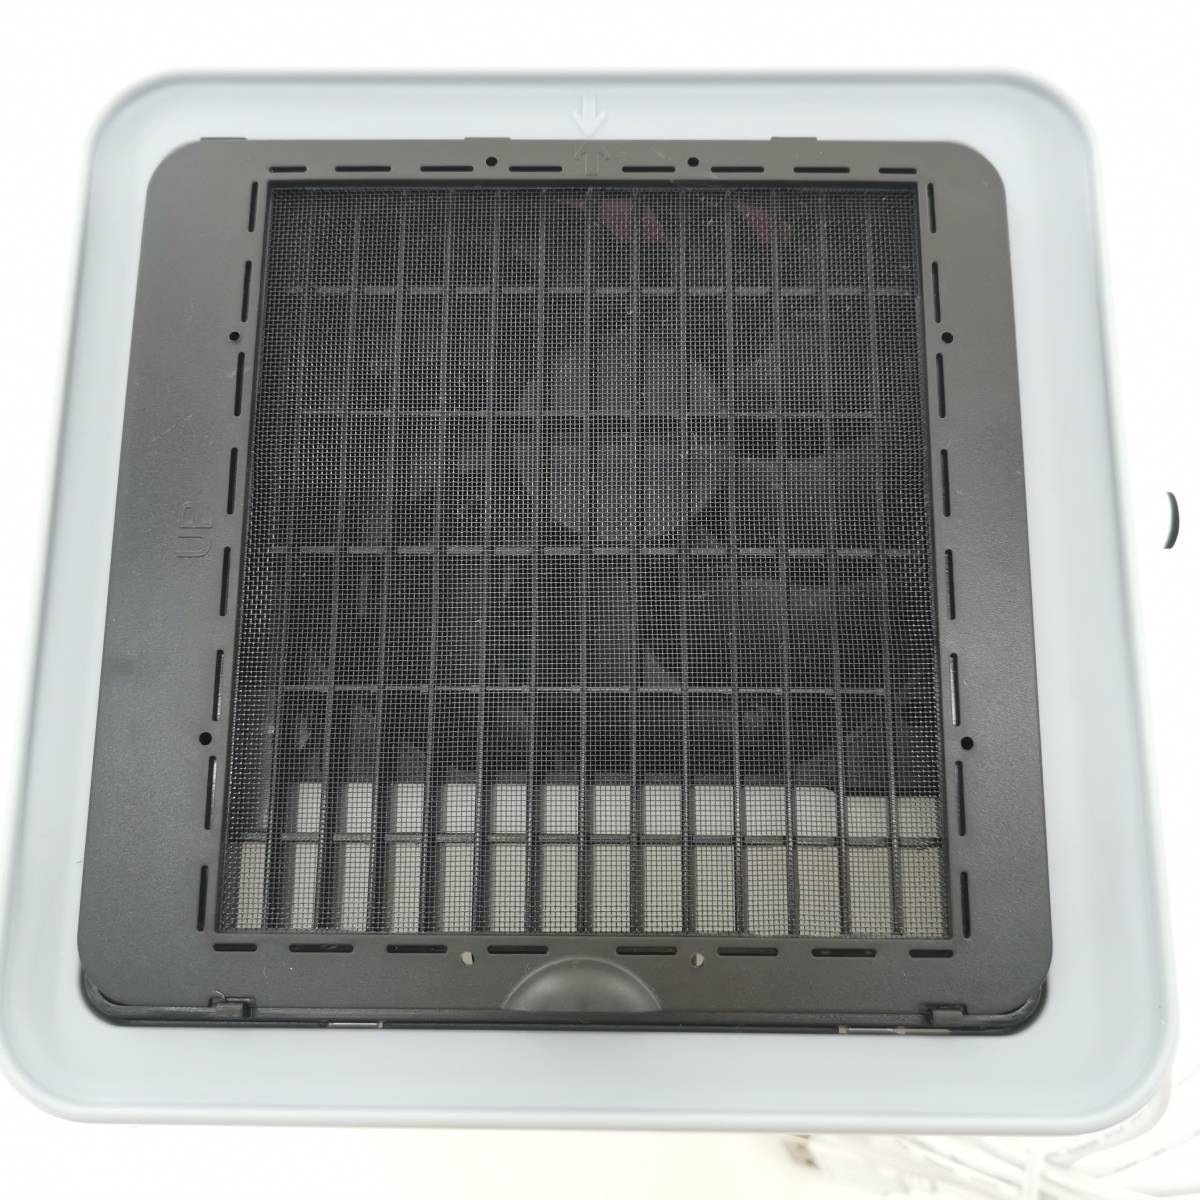  free shipping Shop Japan shop Japan personal cooler,air conditioner here Japanese millet R3 CCH-R3WS cold air fan filter attaching operation verification ending #12024